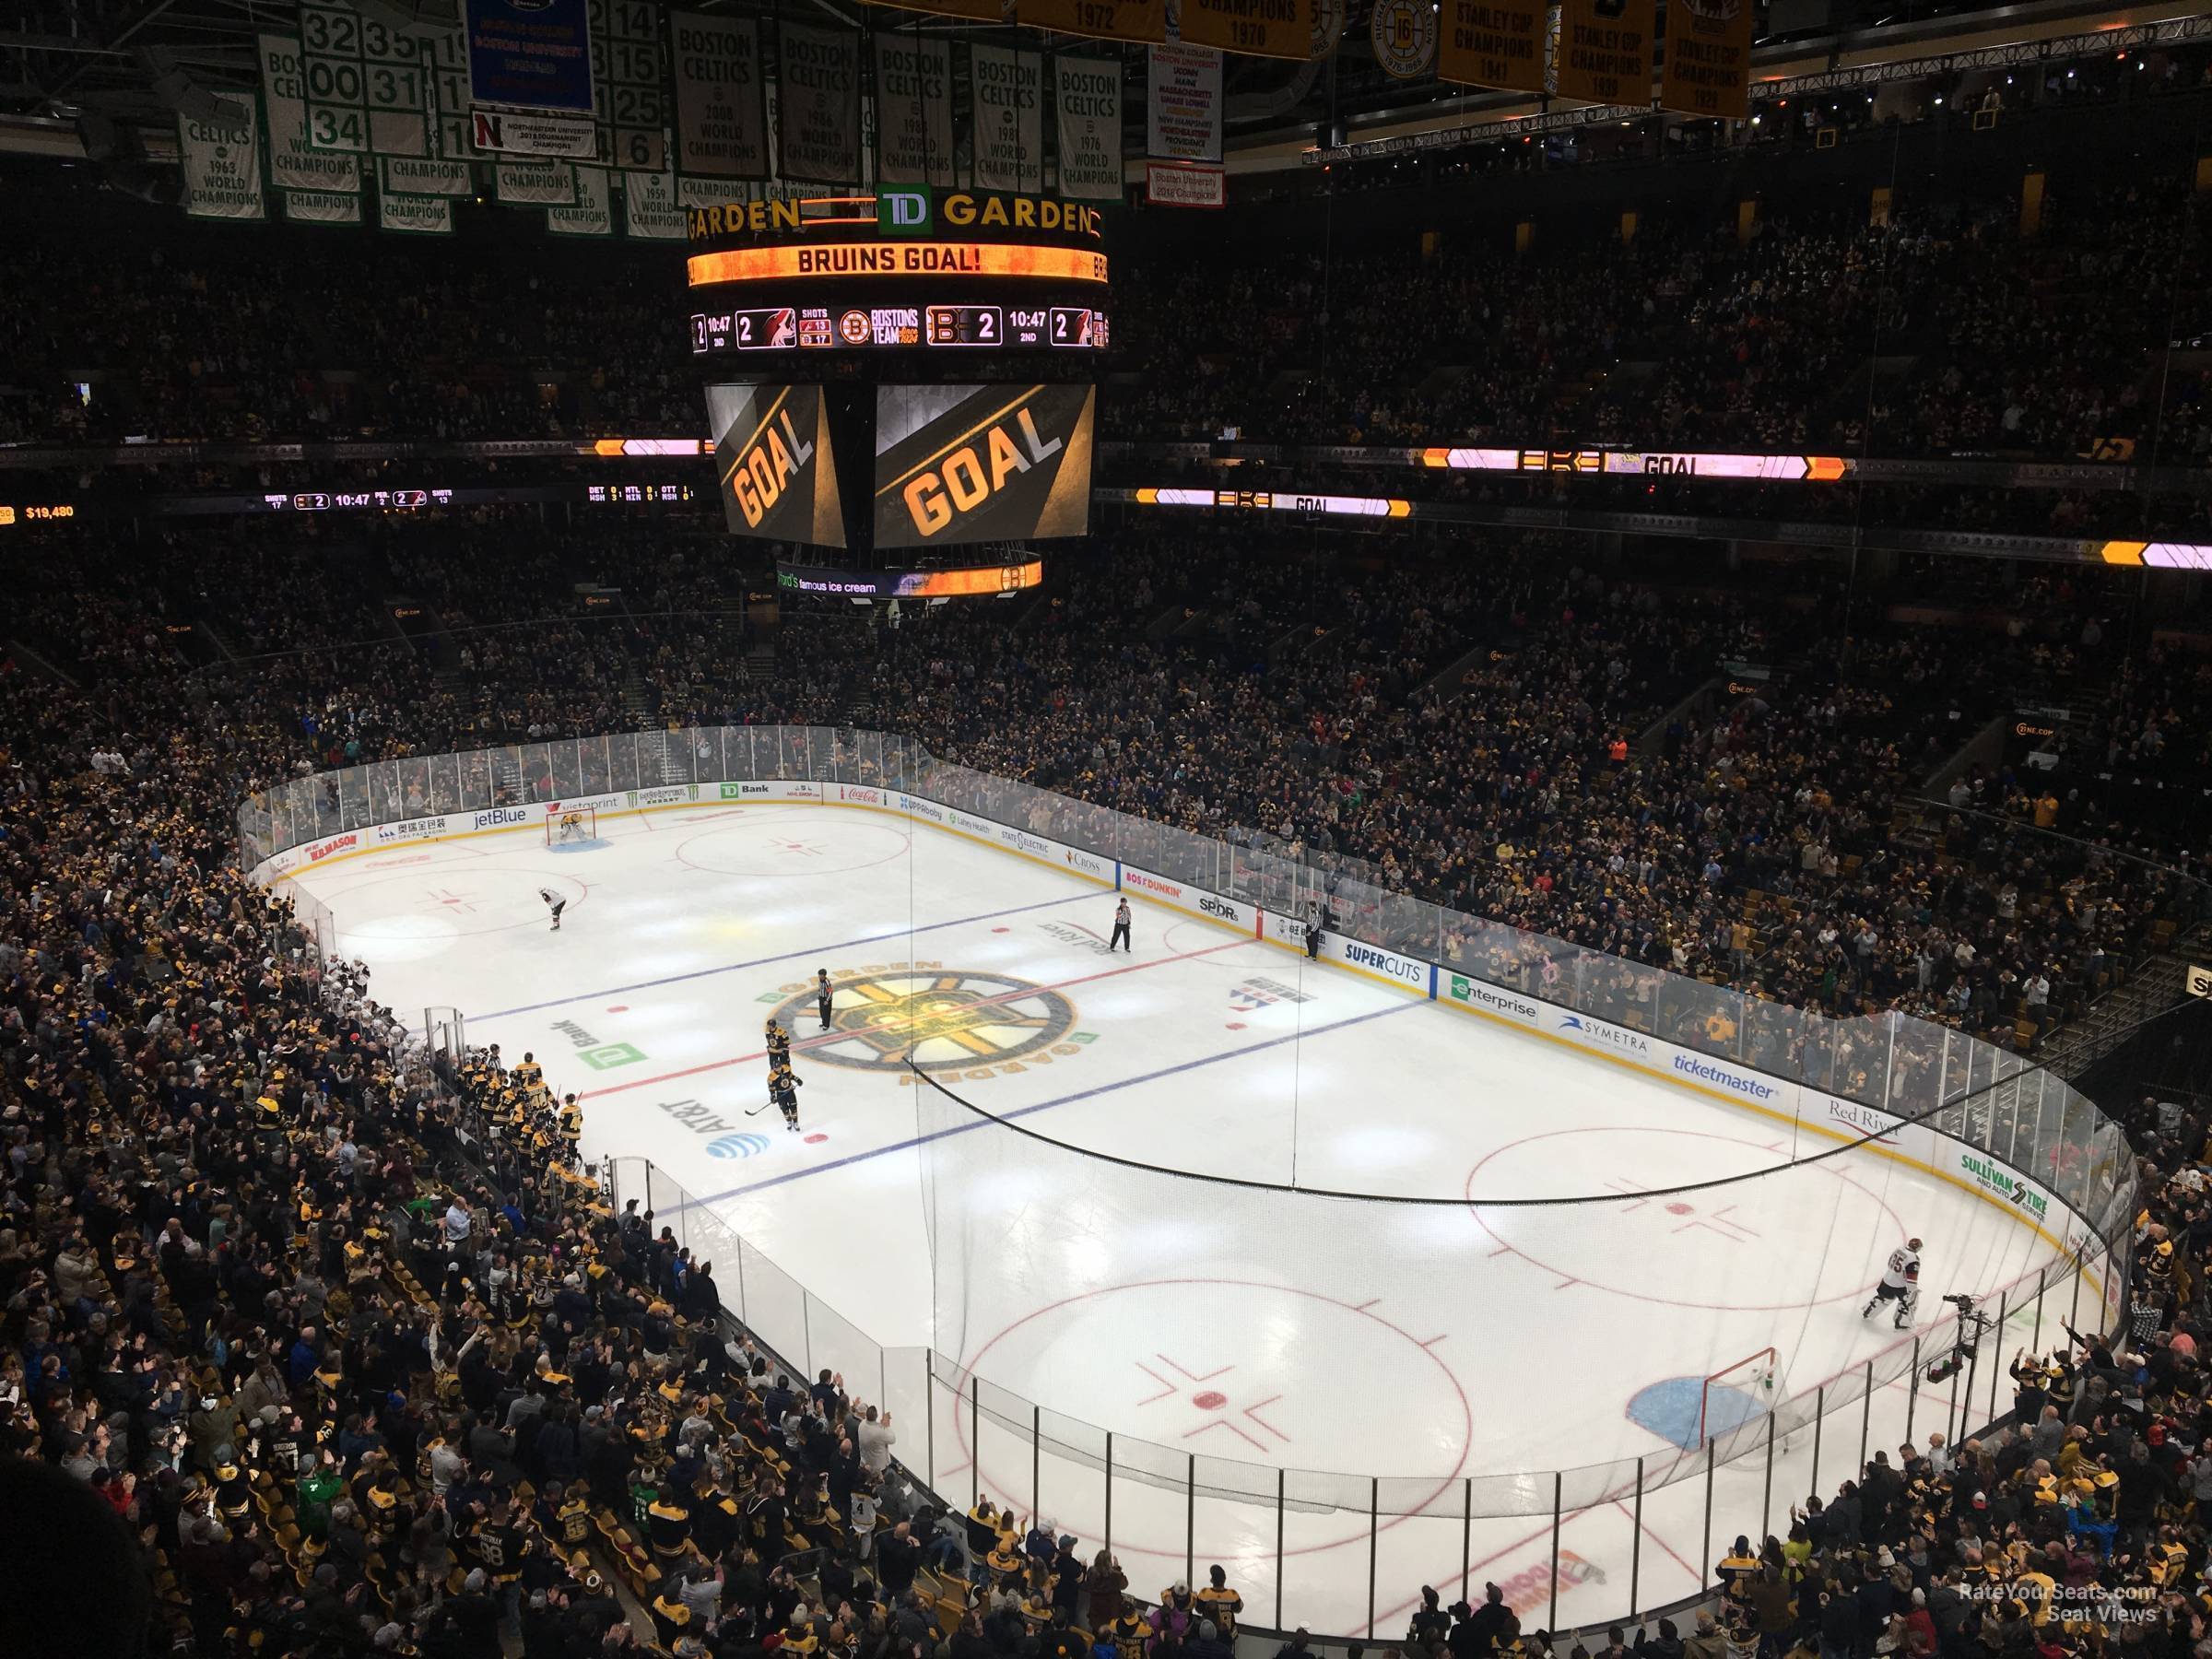 section 326, row 3 seat view  for hockey - td garden